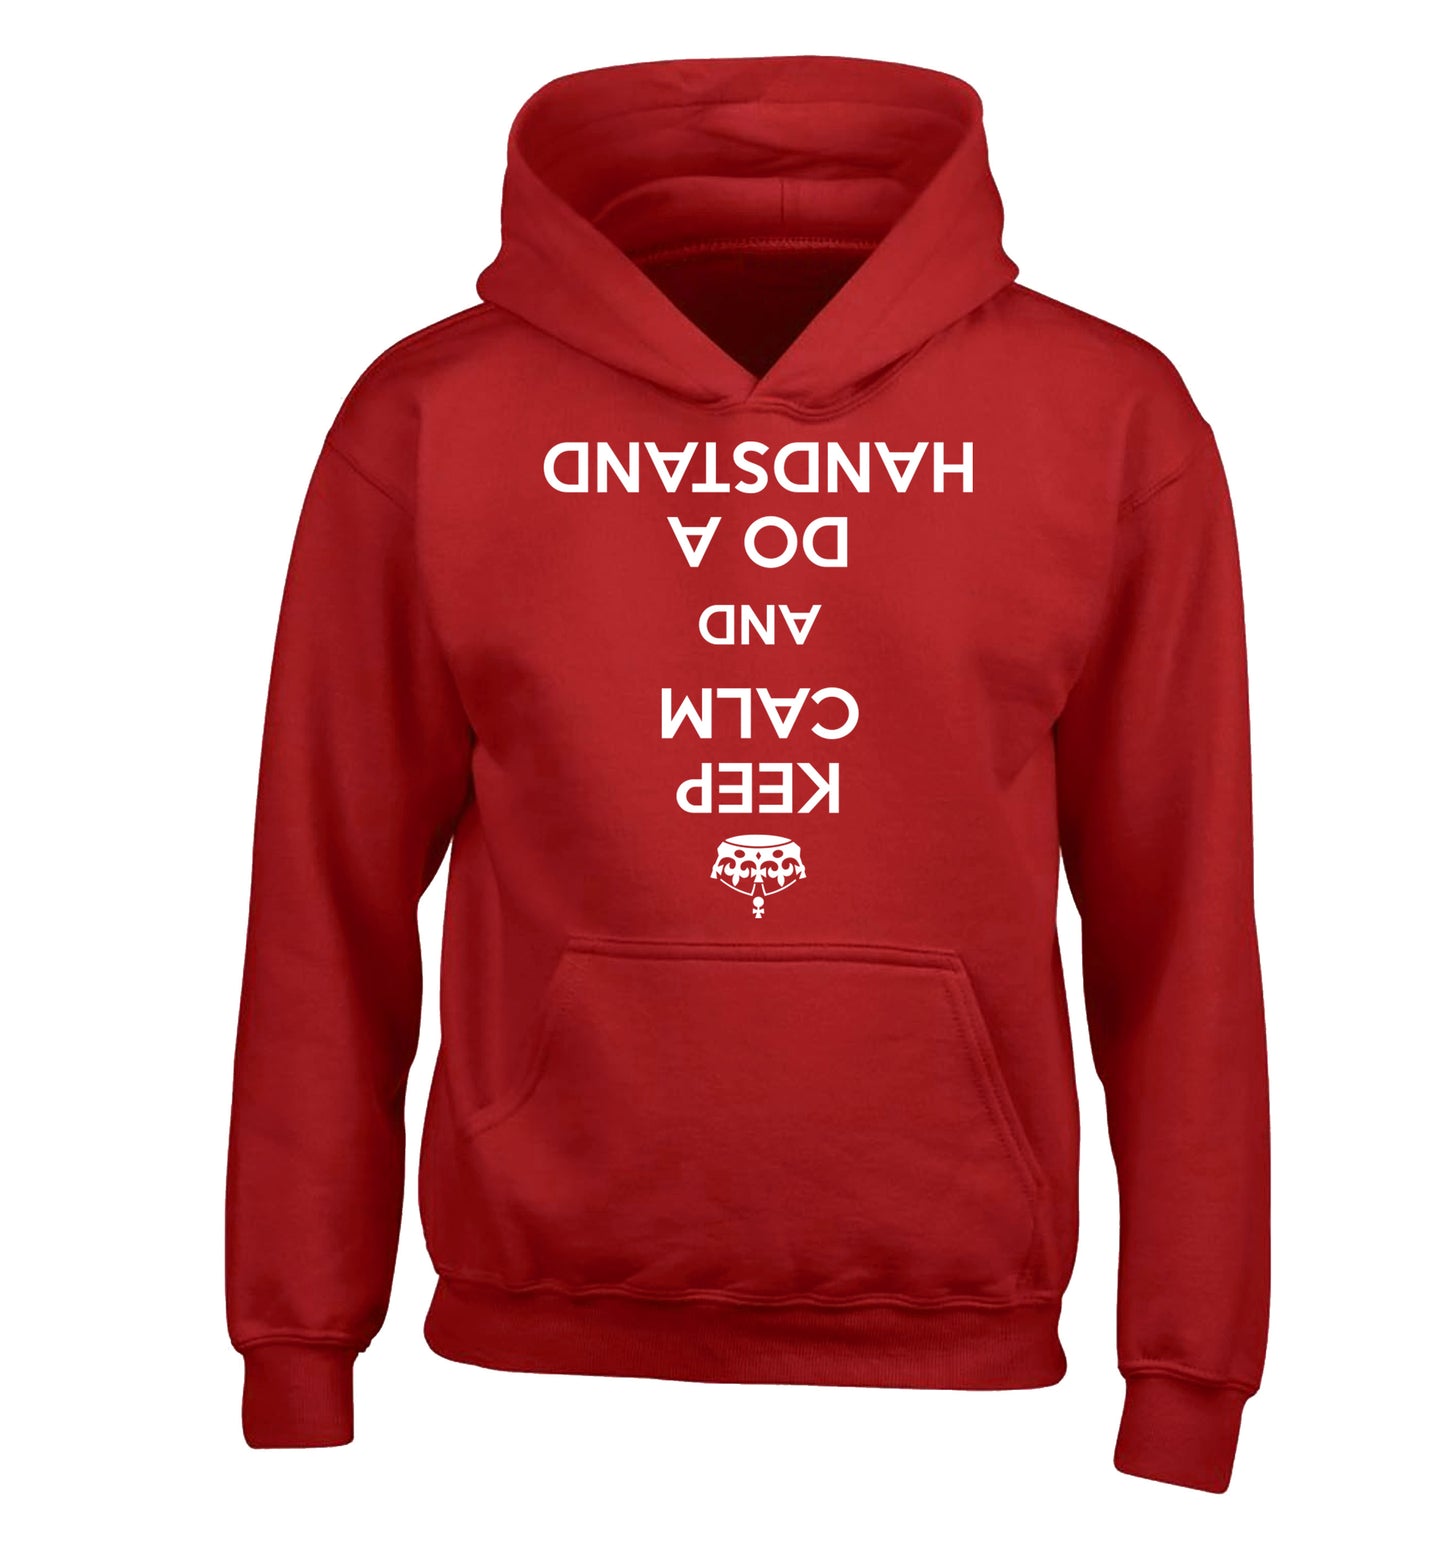 Keep calm and do a handstand children's red hoodie 12-13 Years